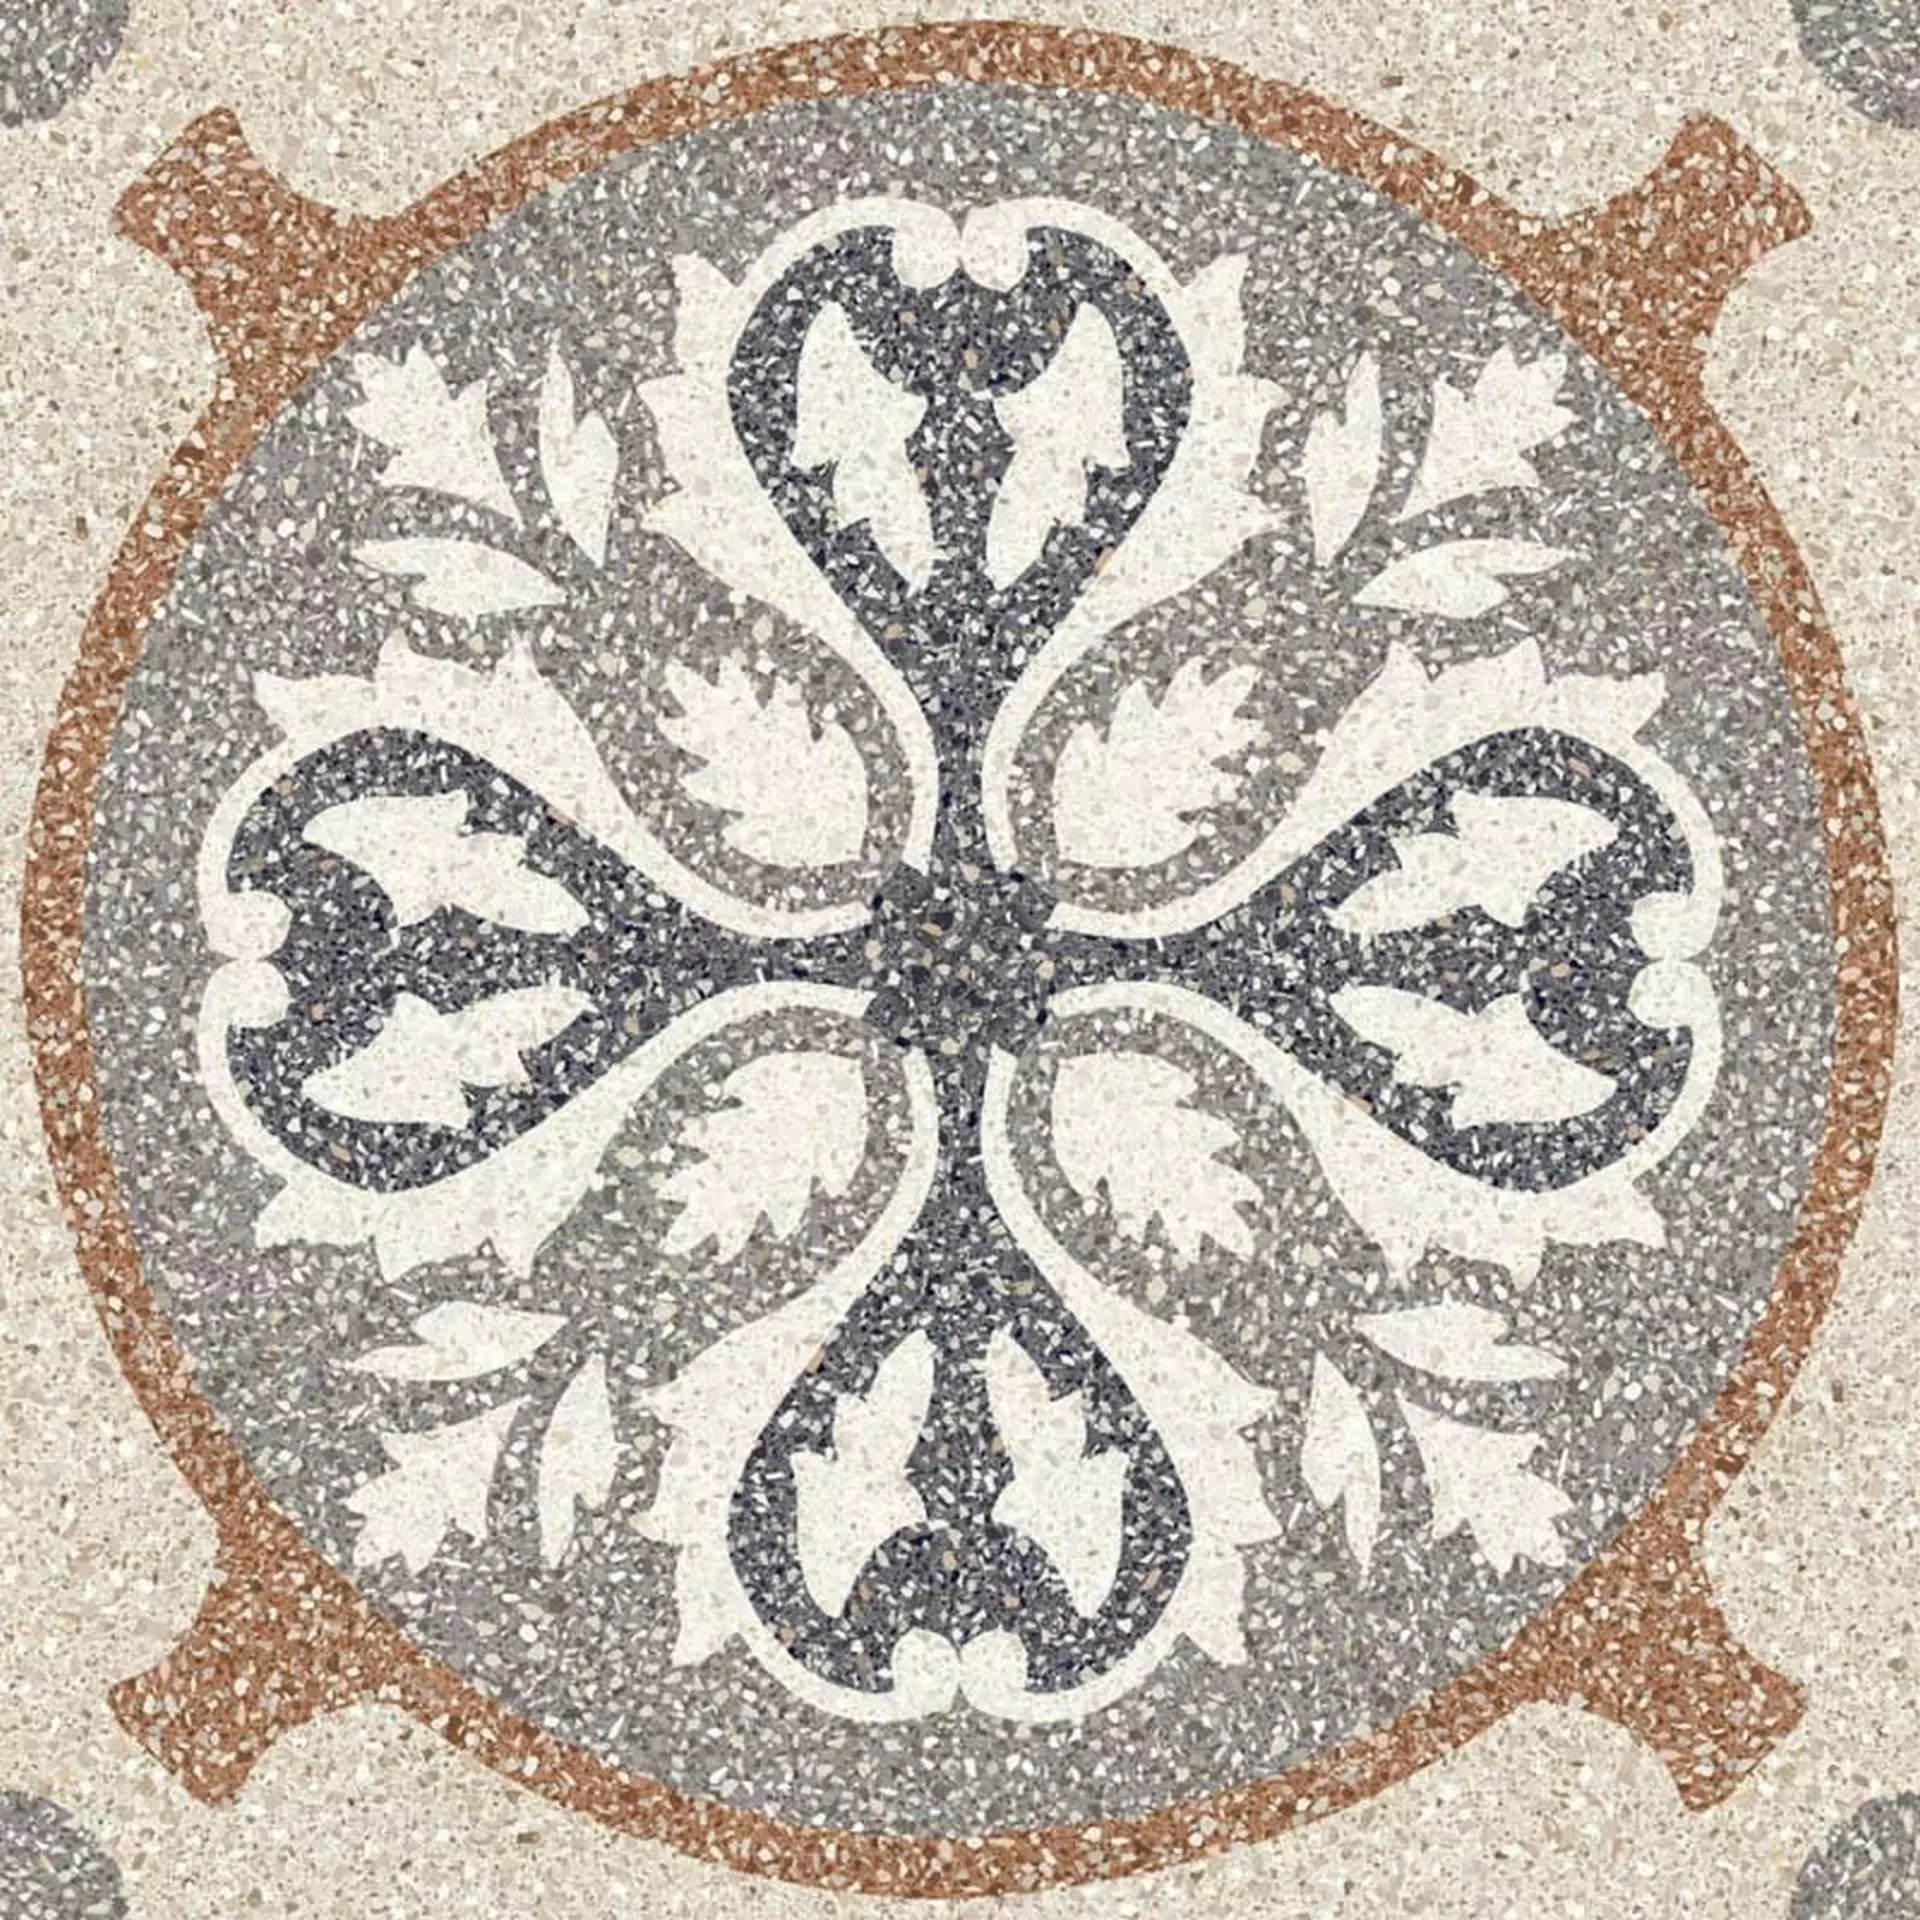 Sant Agostino Newdeco' Patchwork Natural Decor CSANEPWK60 60x60cm rectified 10mm